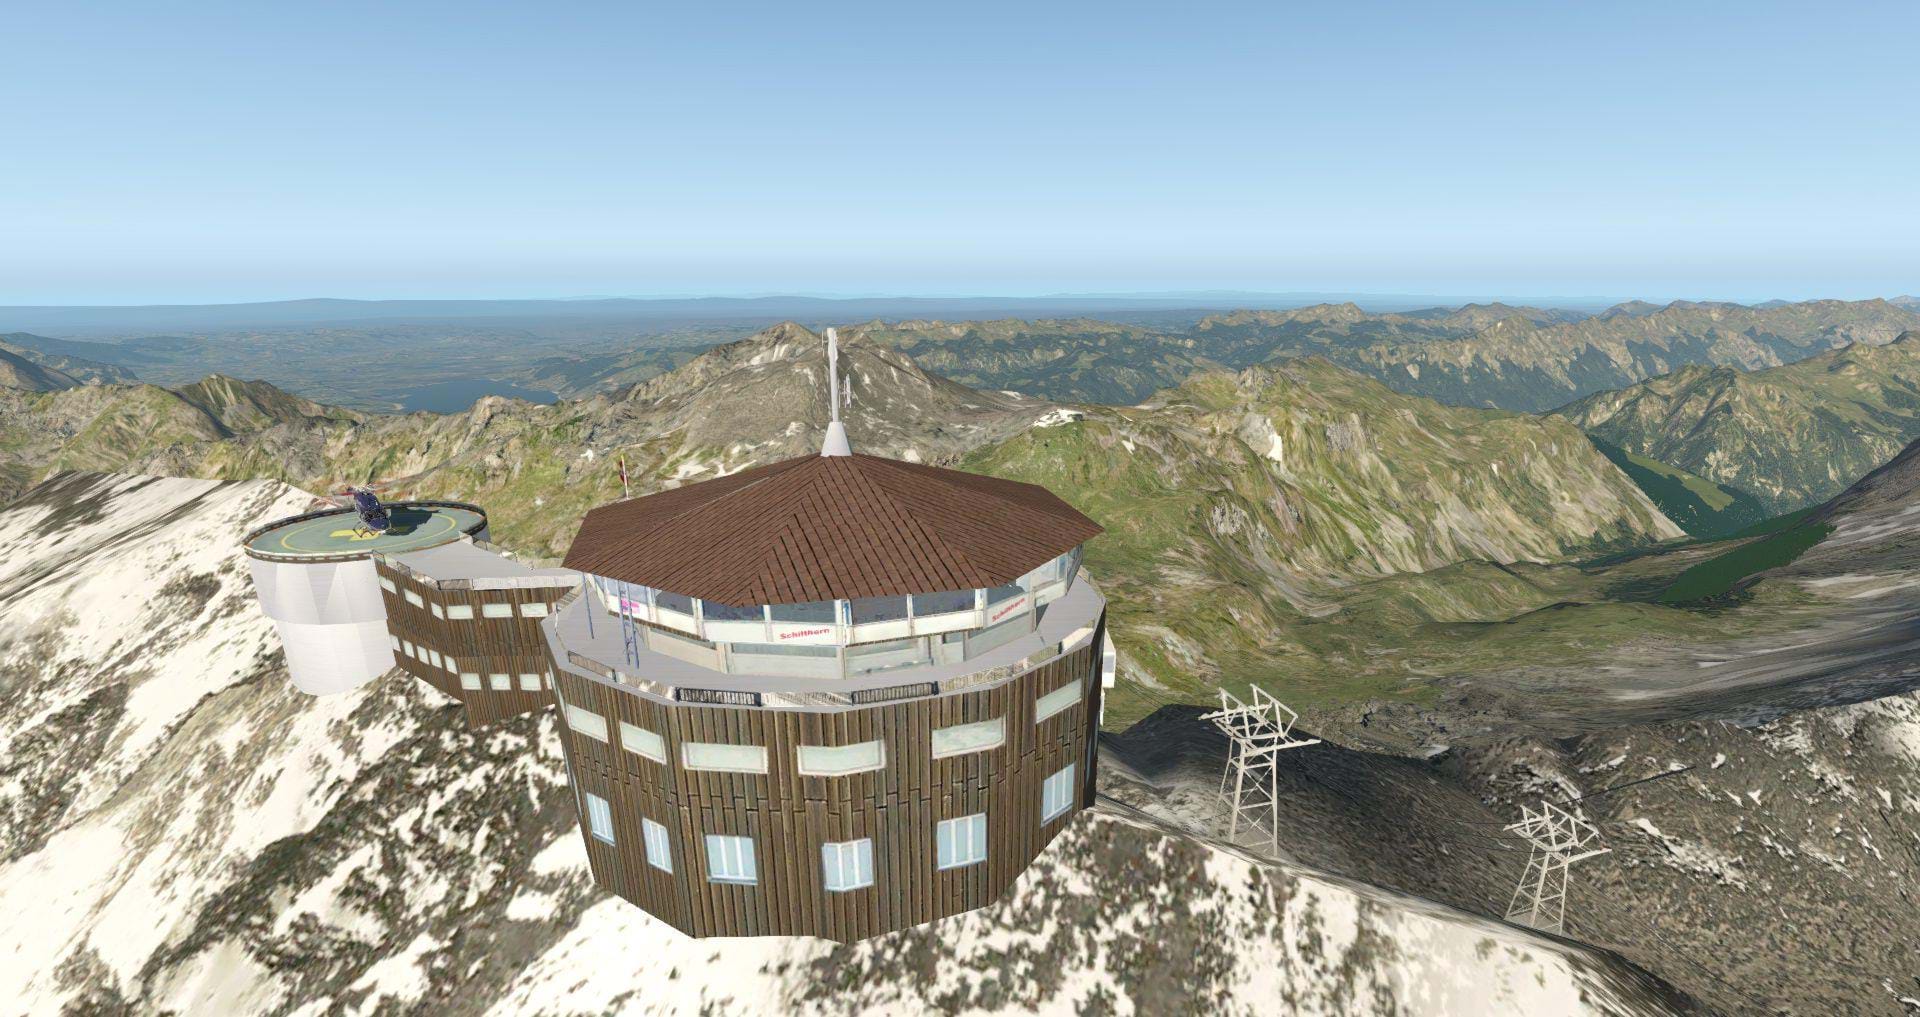 Frank Dainese and Fabio Bellini's Eiger Park 3D for X-Plane